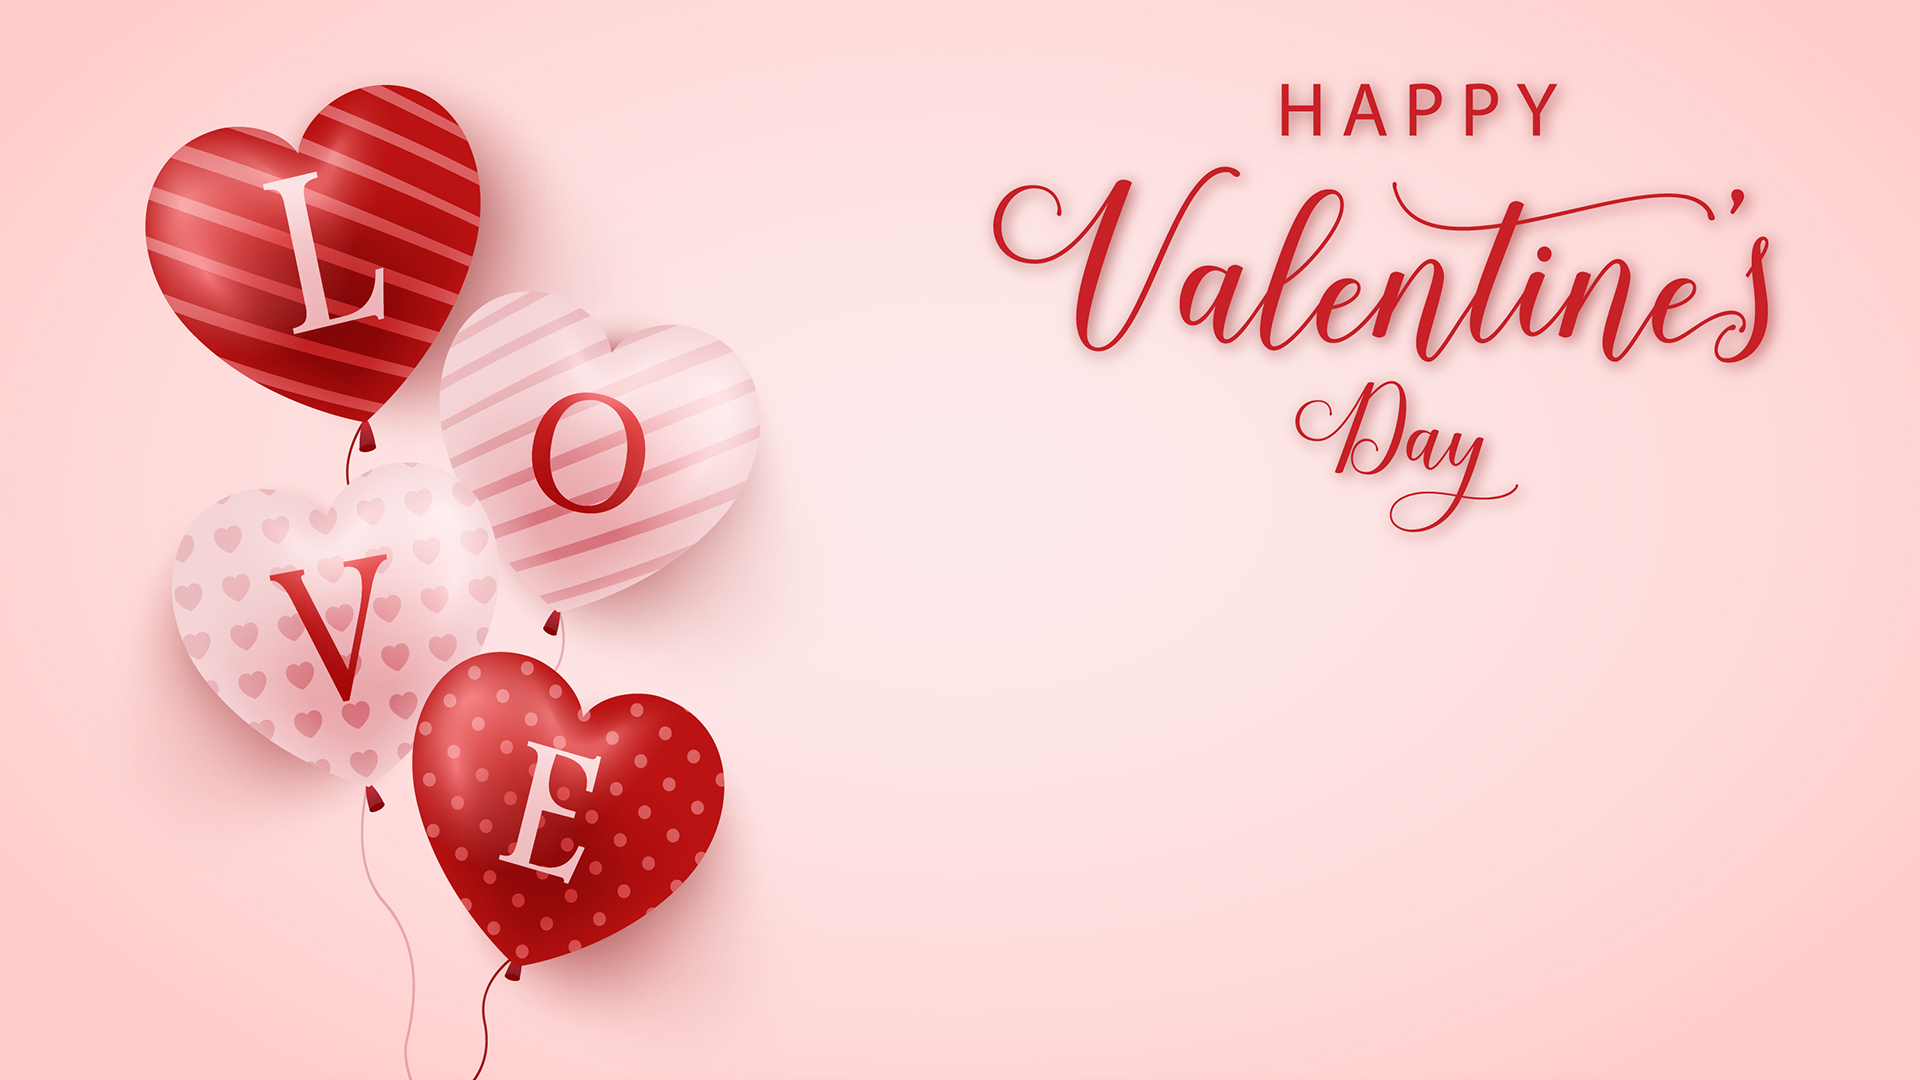 Happy Valentine's Day. Virtual background to use on Zoom, Microsoft Teams, Skype, Google Meet, WebEx or any other compatible app.